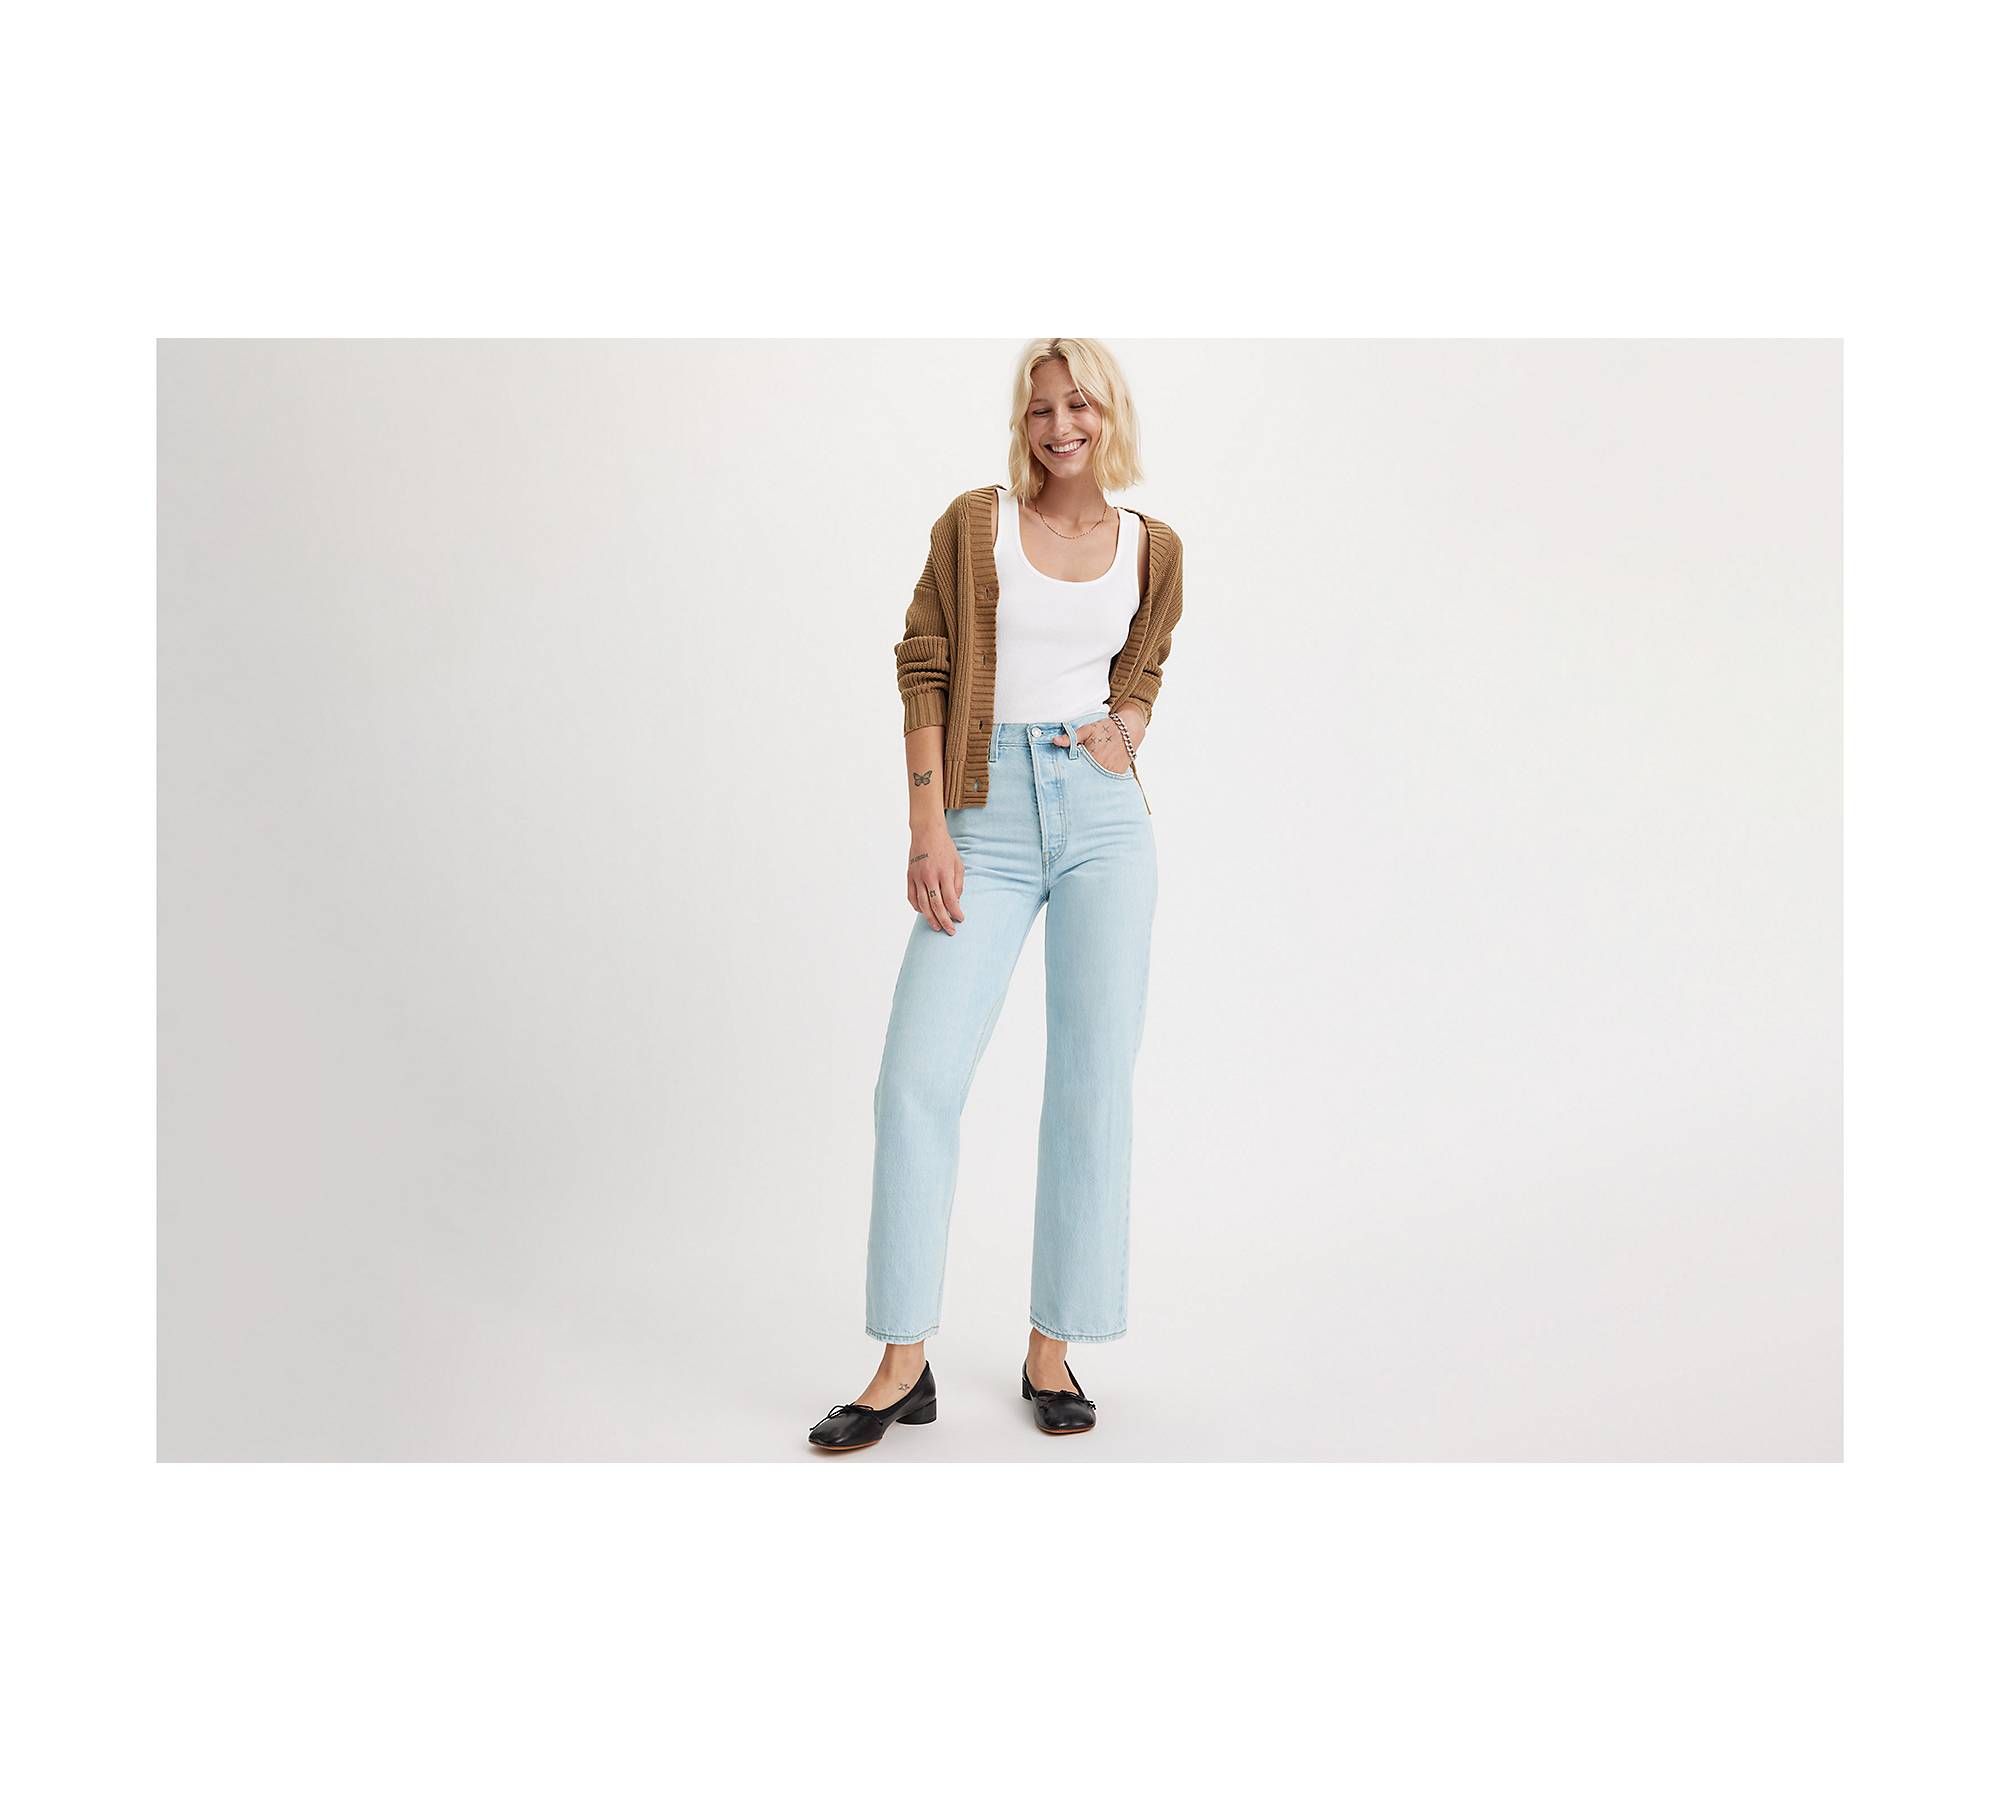 Ribcage Straight Ankle Women's Jeans - Light Wash